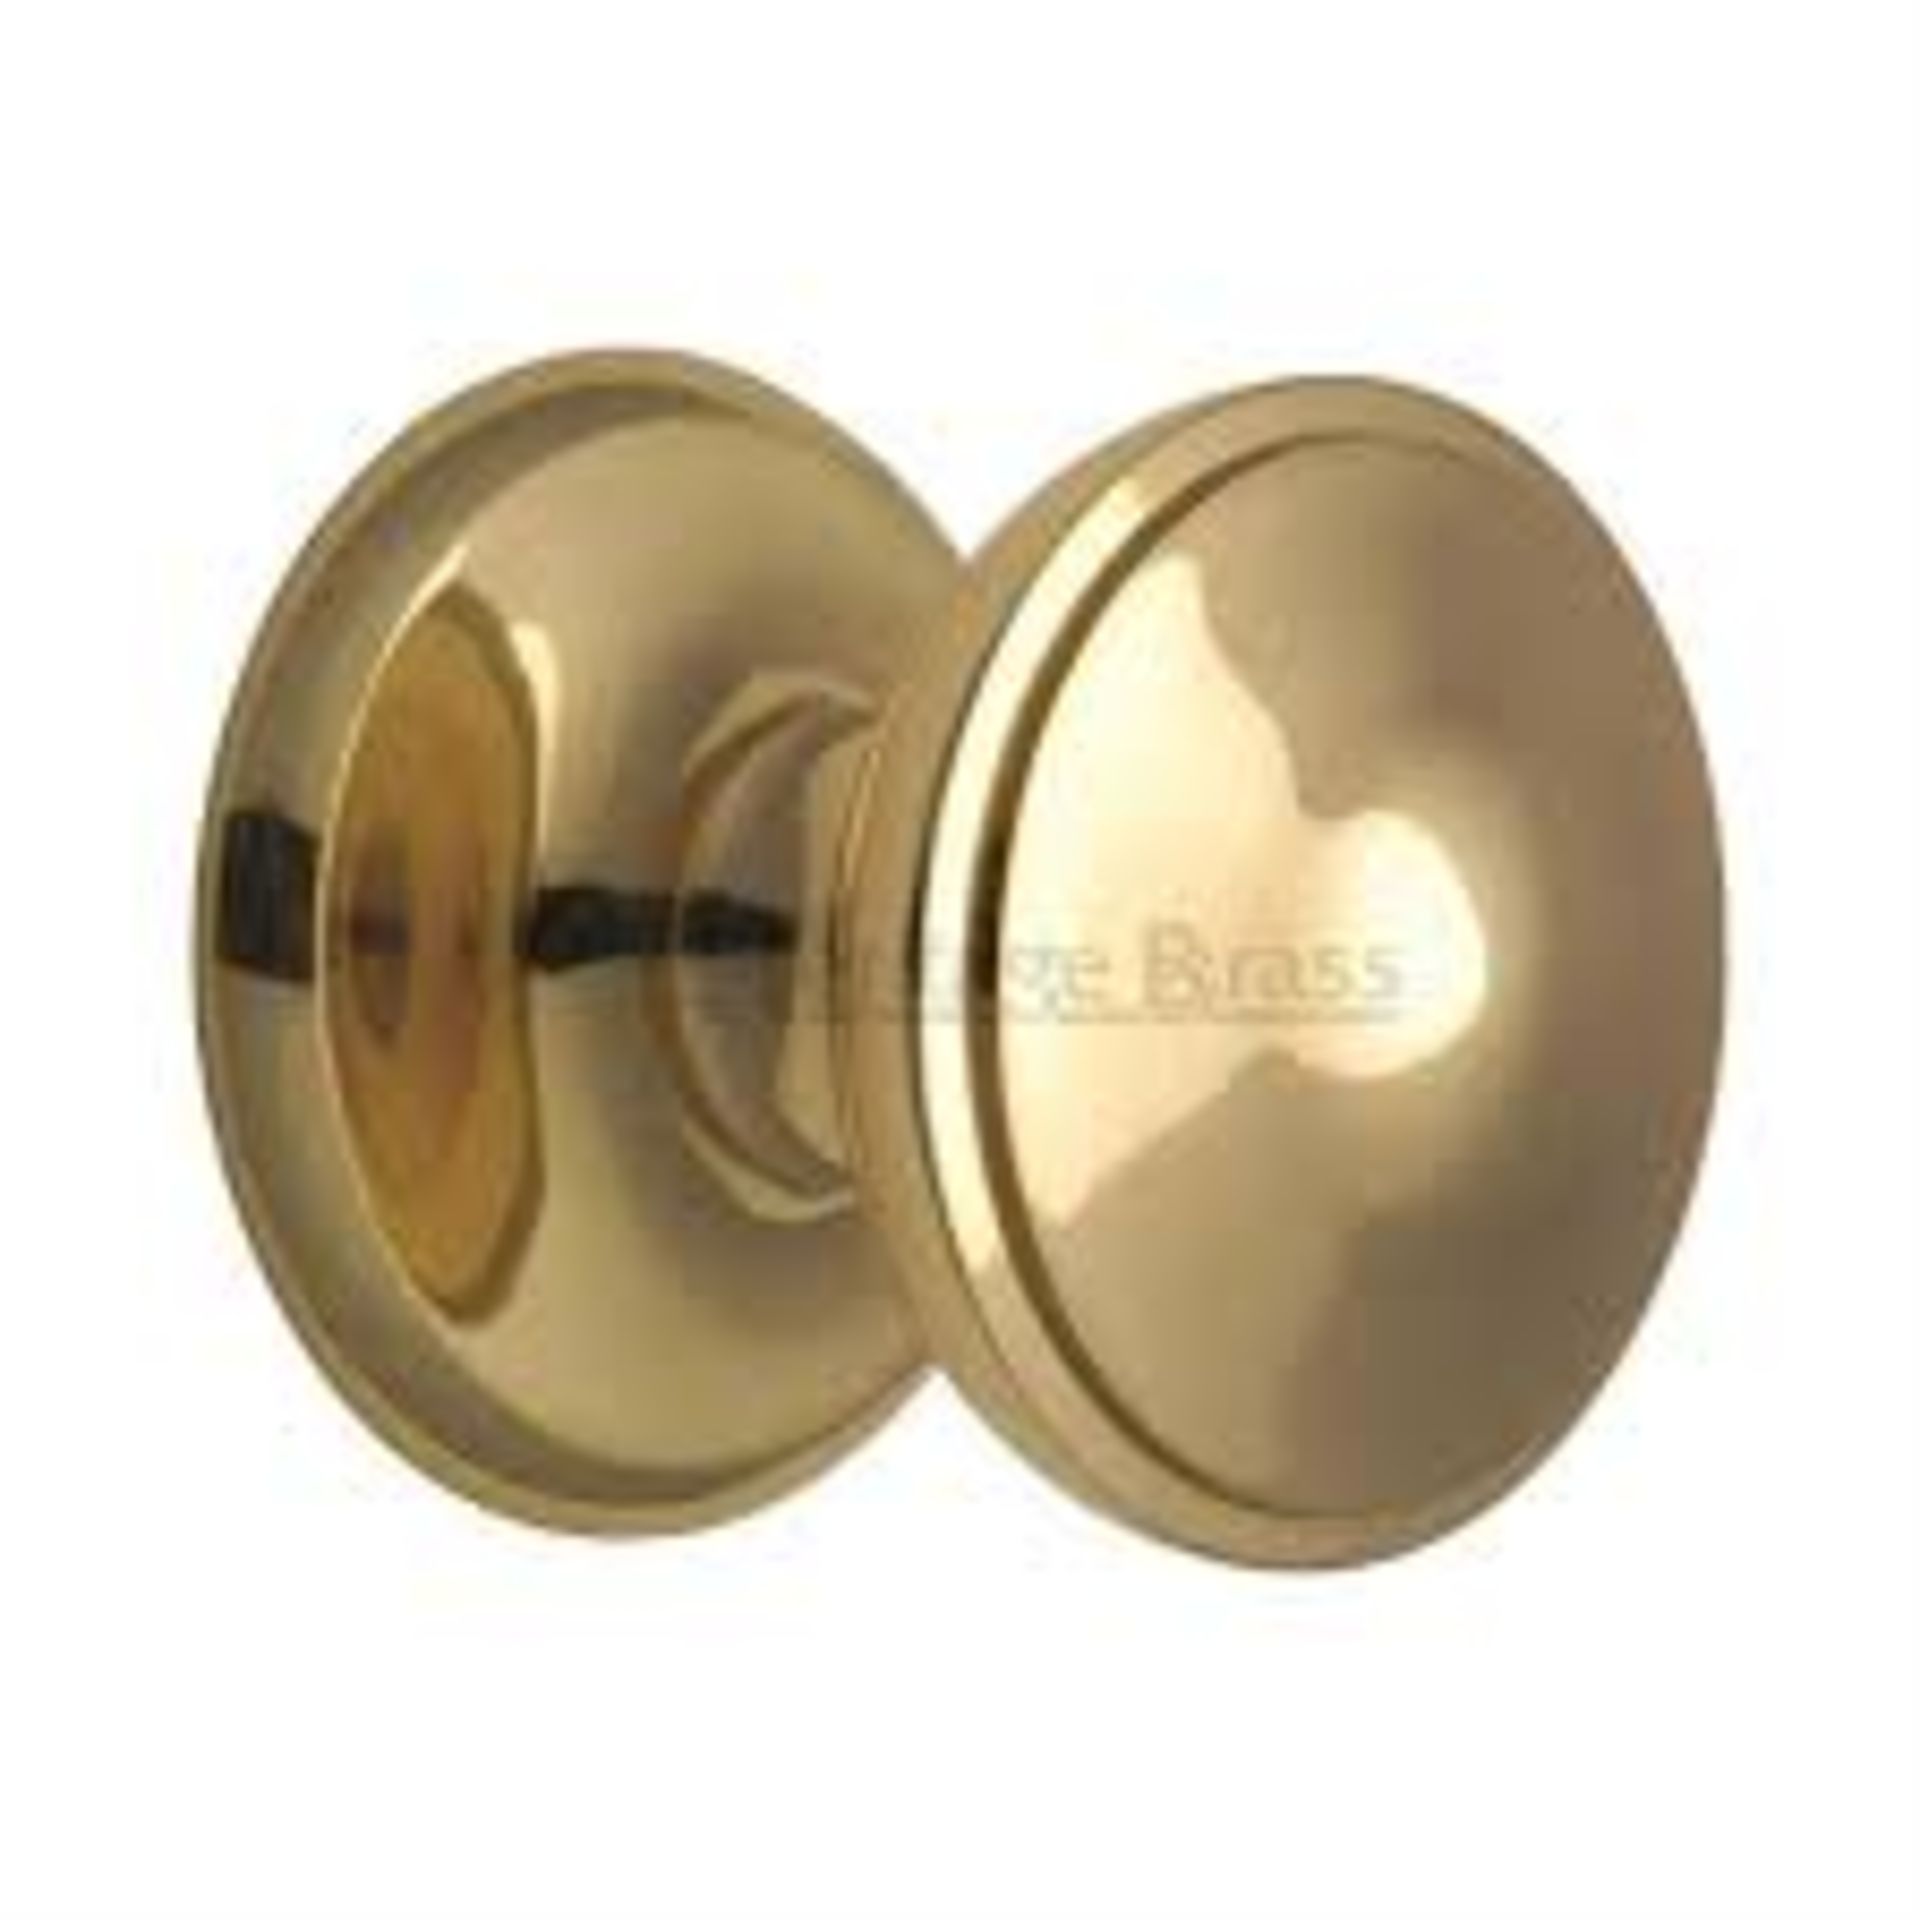 2 x M.Marcus Round Centre Door Knobs in Polished Brass - New Stock (see below) - Location: Peterlee